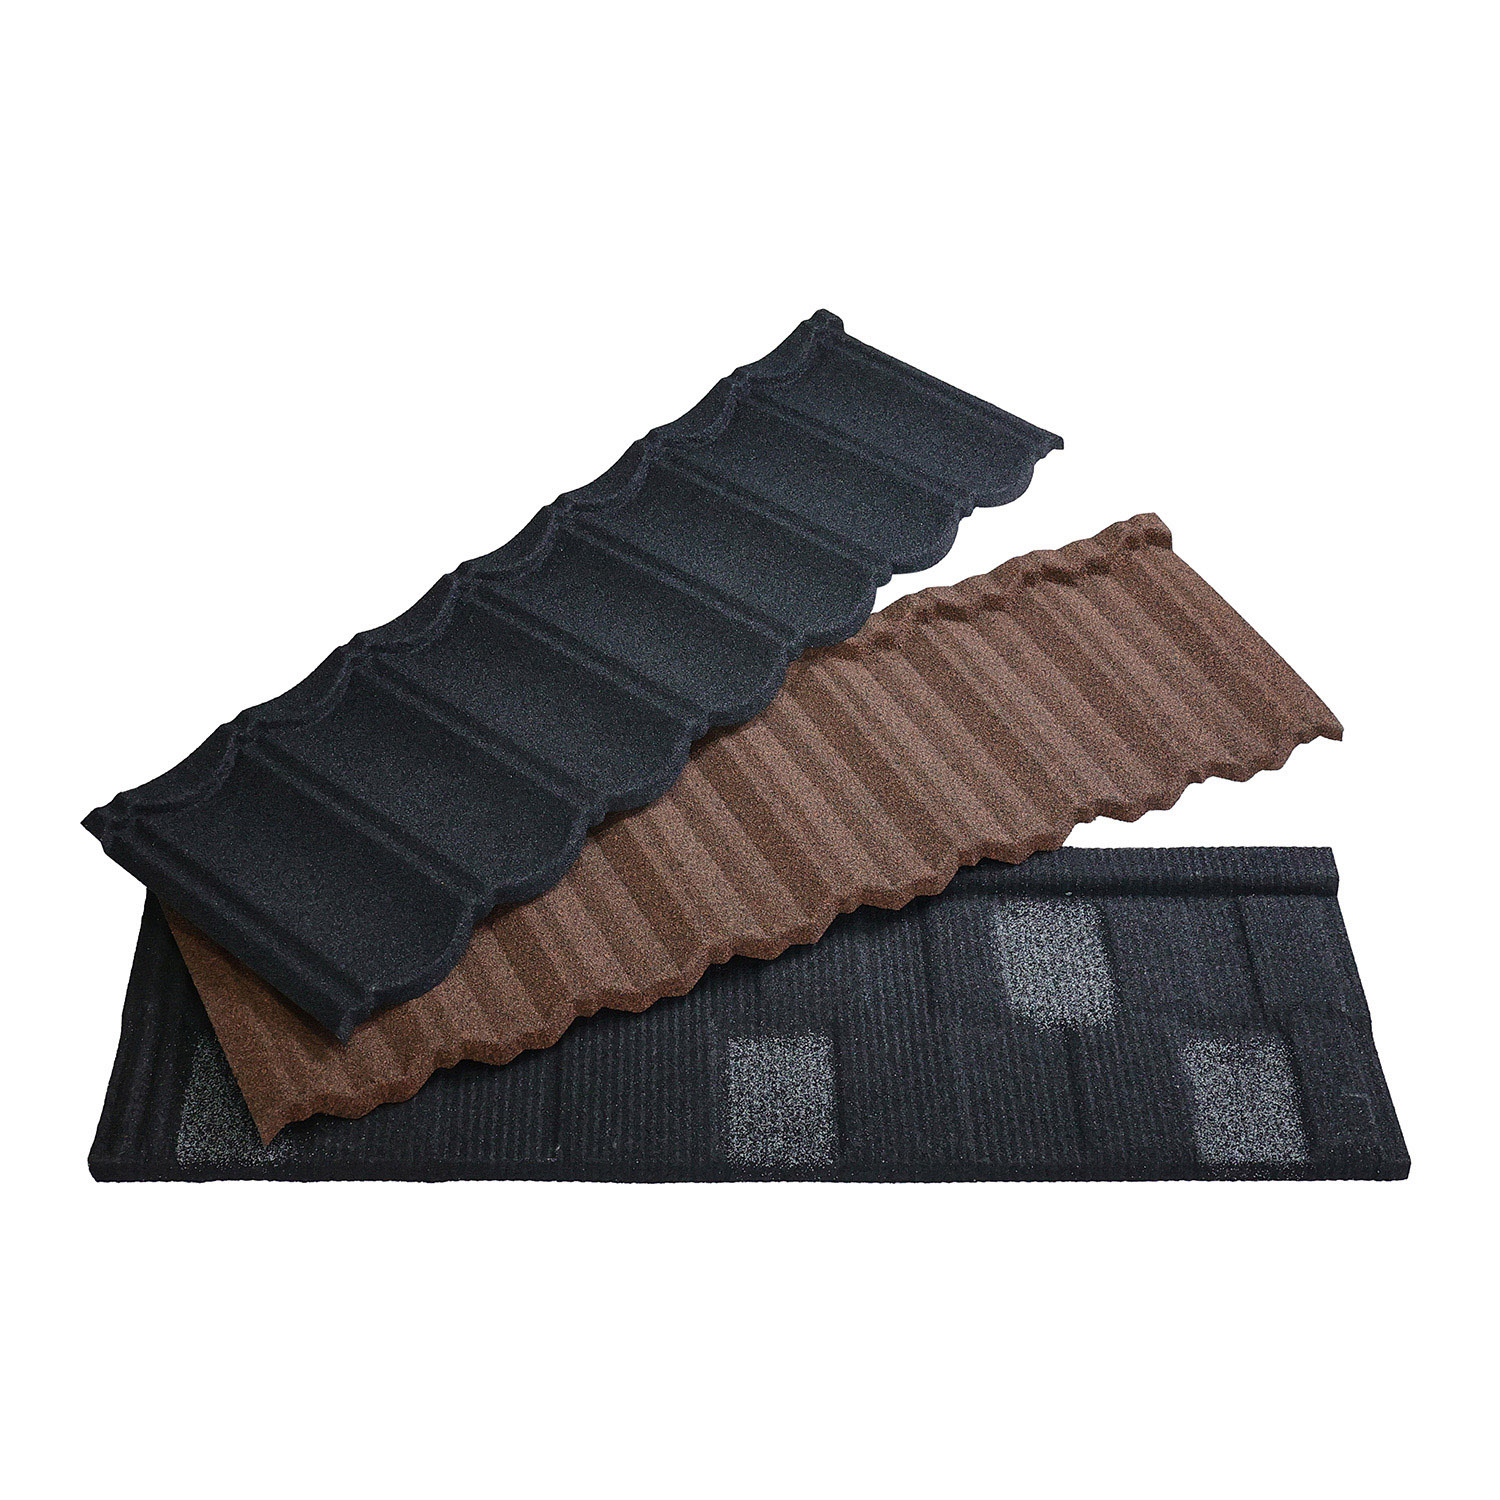 CE Classic Roof Tile Galvanized Steel Heat Insulation Stone Coated Metal Roof